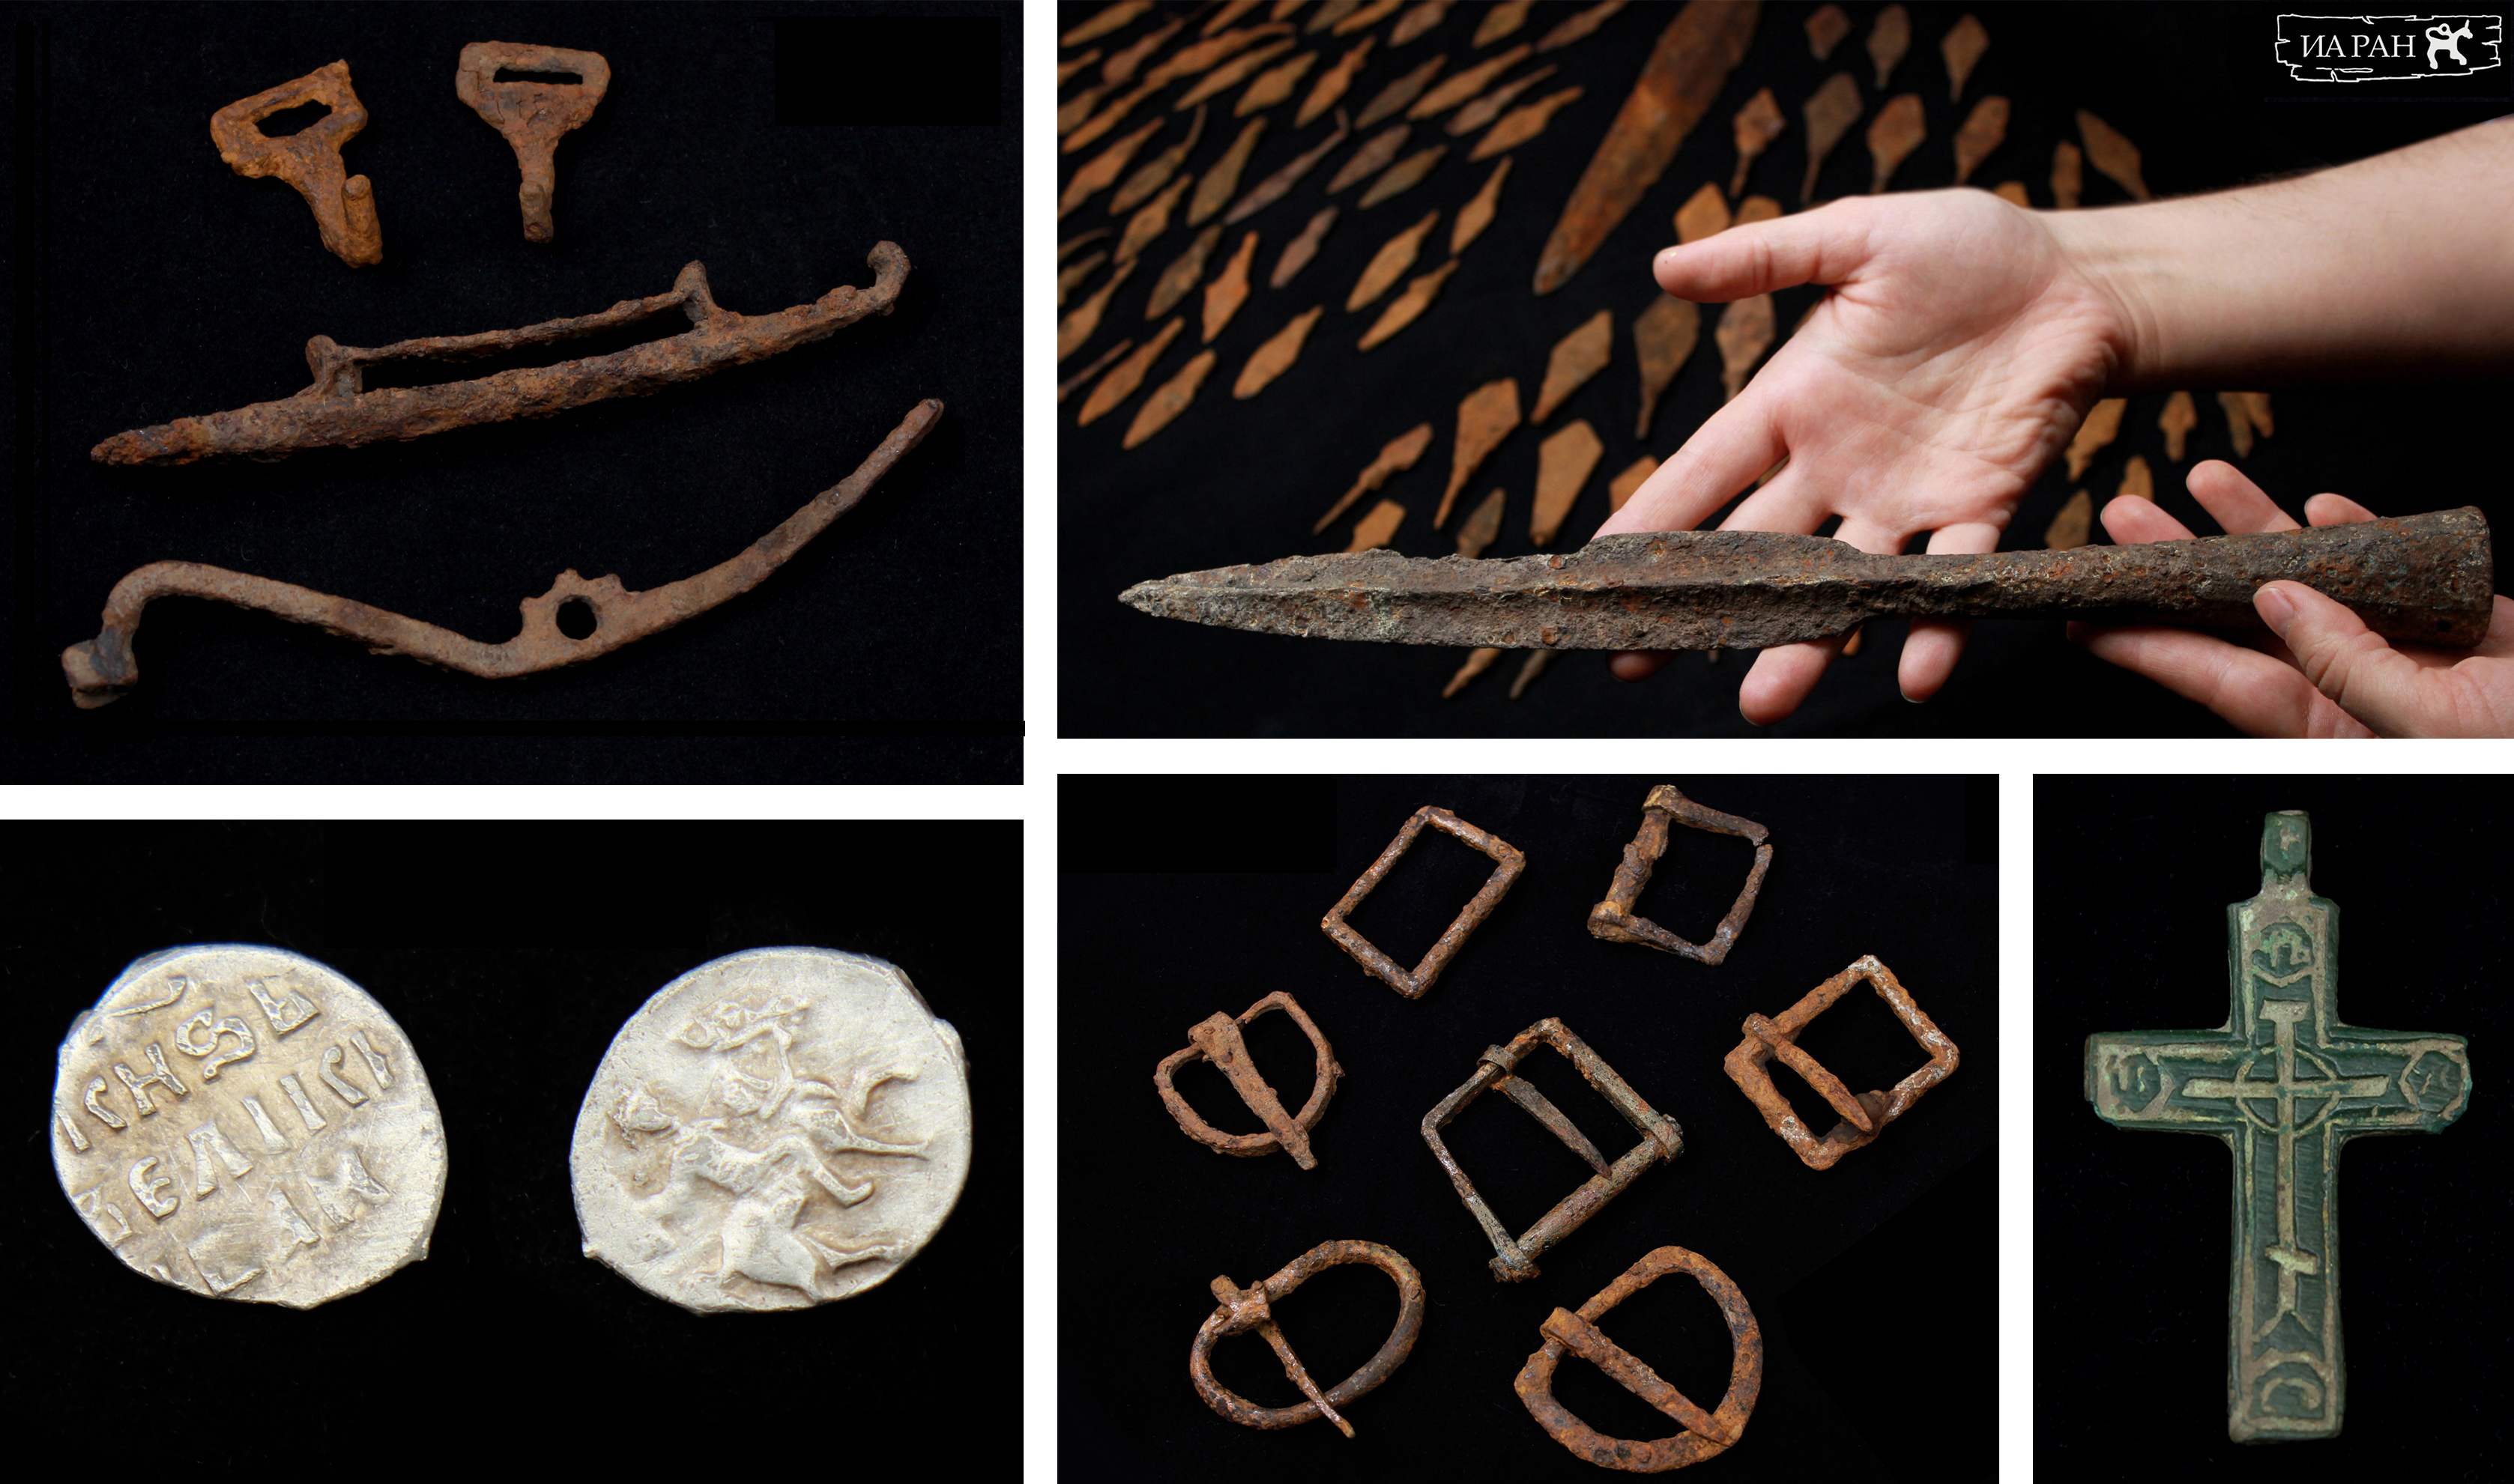 Some of the artifacts found at the site of the Battle of Sudbischen. Photos by Oleg Radyush